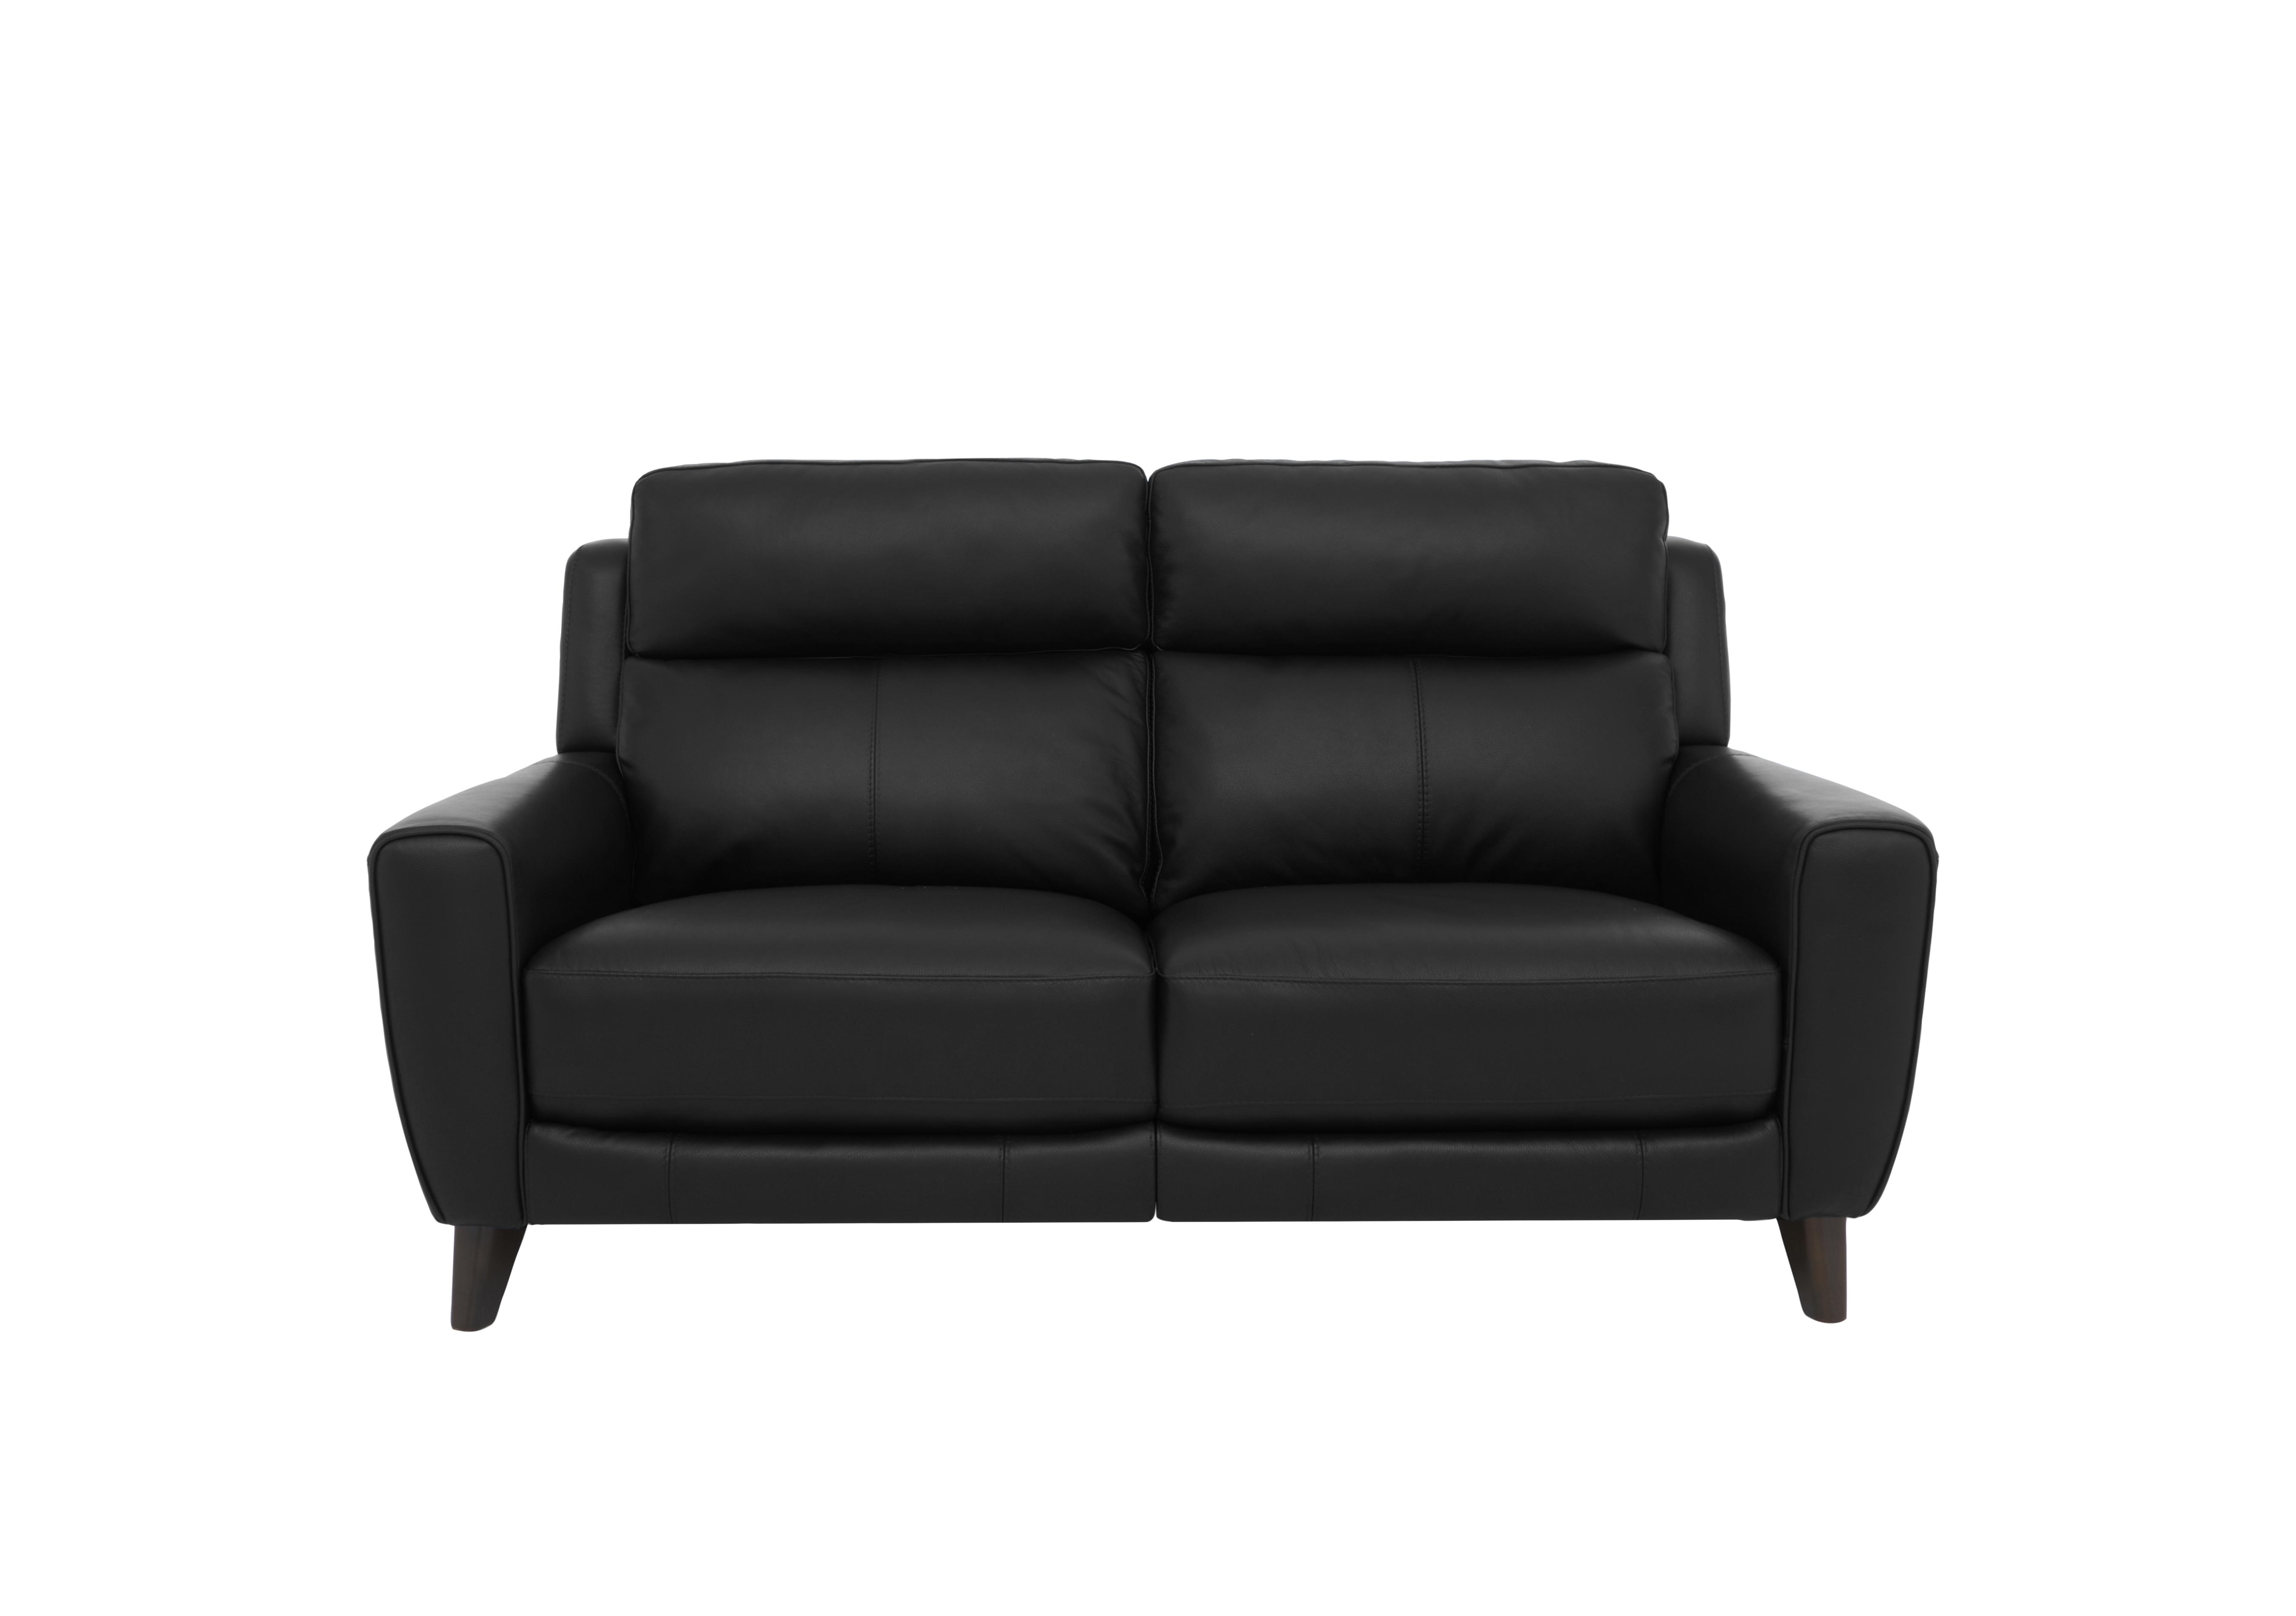 Zen 2 Seater Leather Power Recliner Sofa with Power Headrests and Power Lumbar in Bx-023c Black on Furniture Village